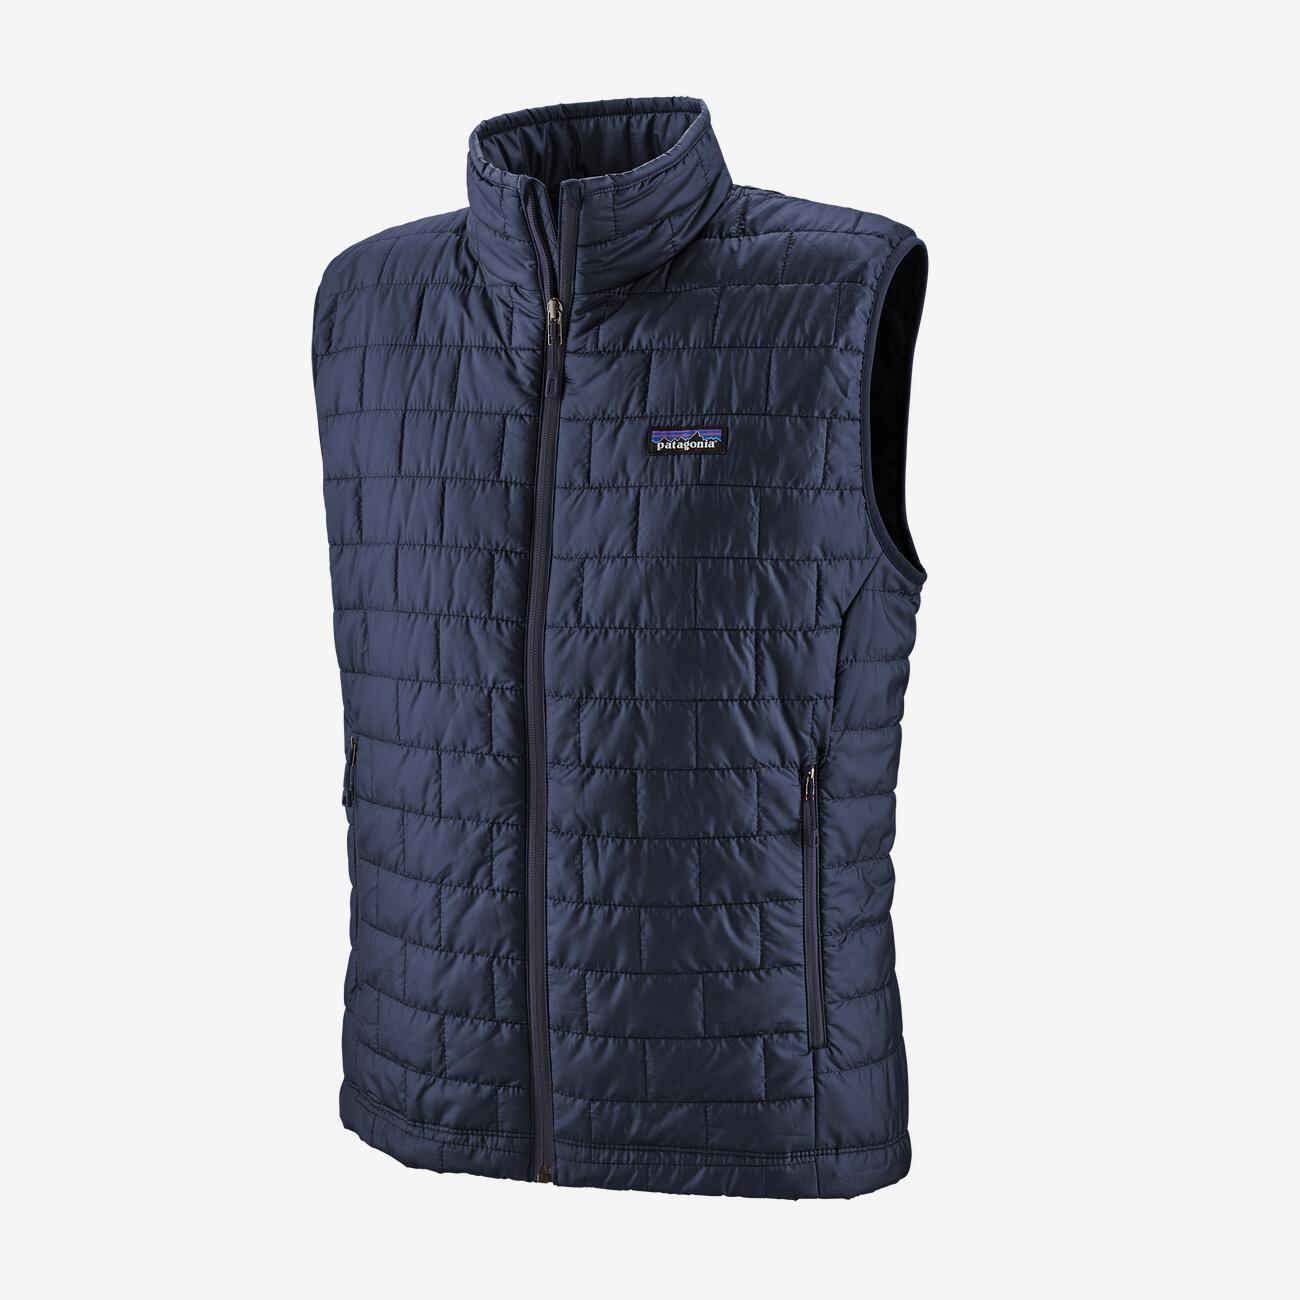 Patagonia Men's Nano Puff Vest-MENS CLOTHING-Classic Navy-2XL-Kevin's Fine Outdoor Gear & Apparel